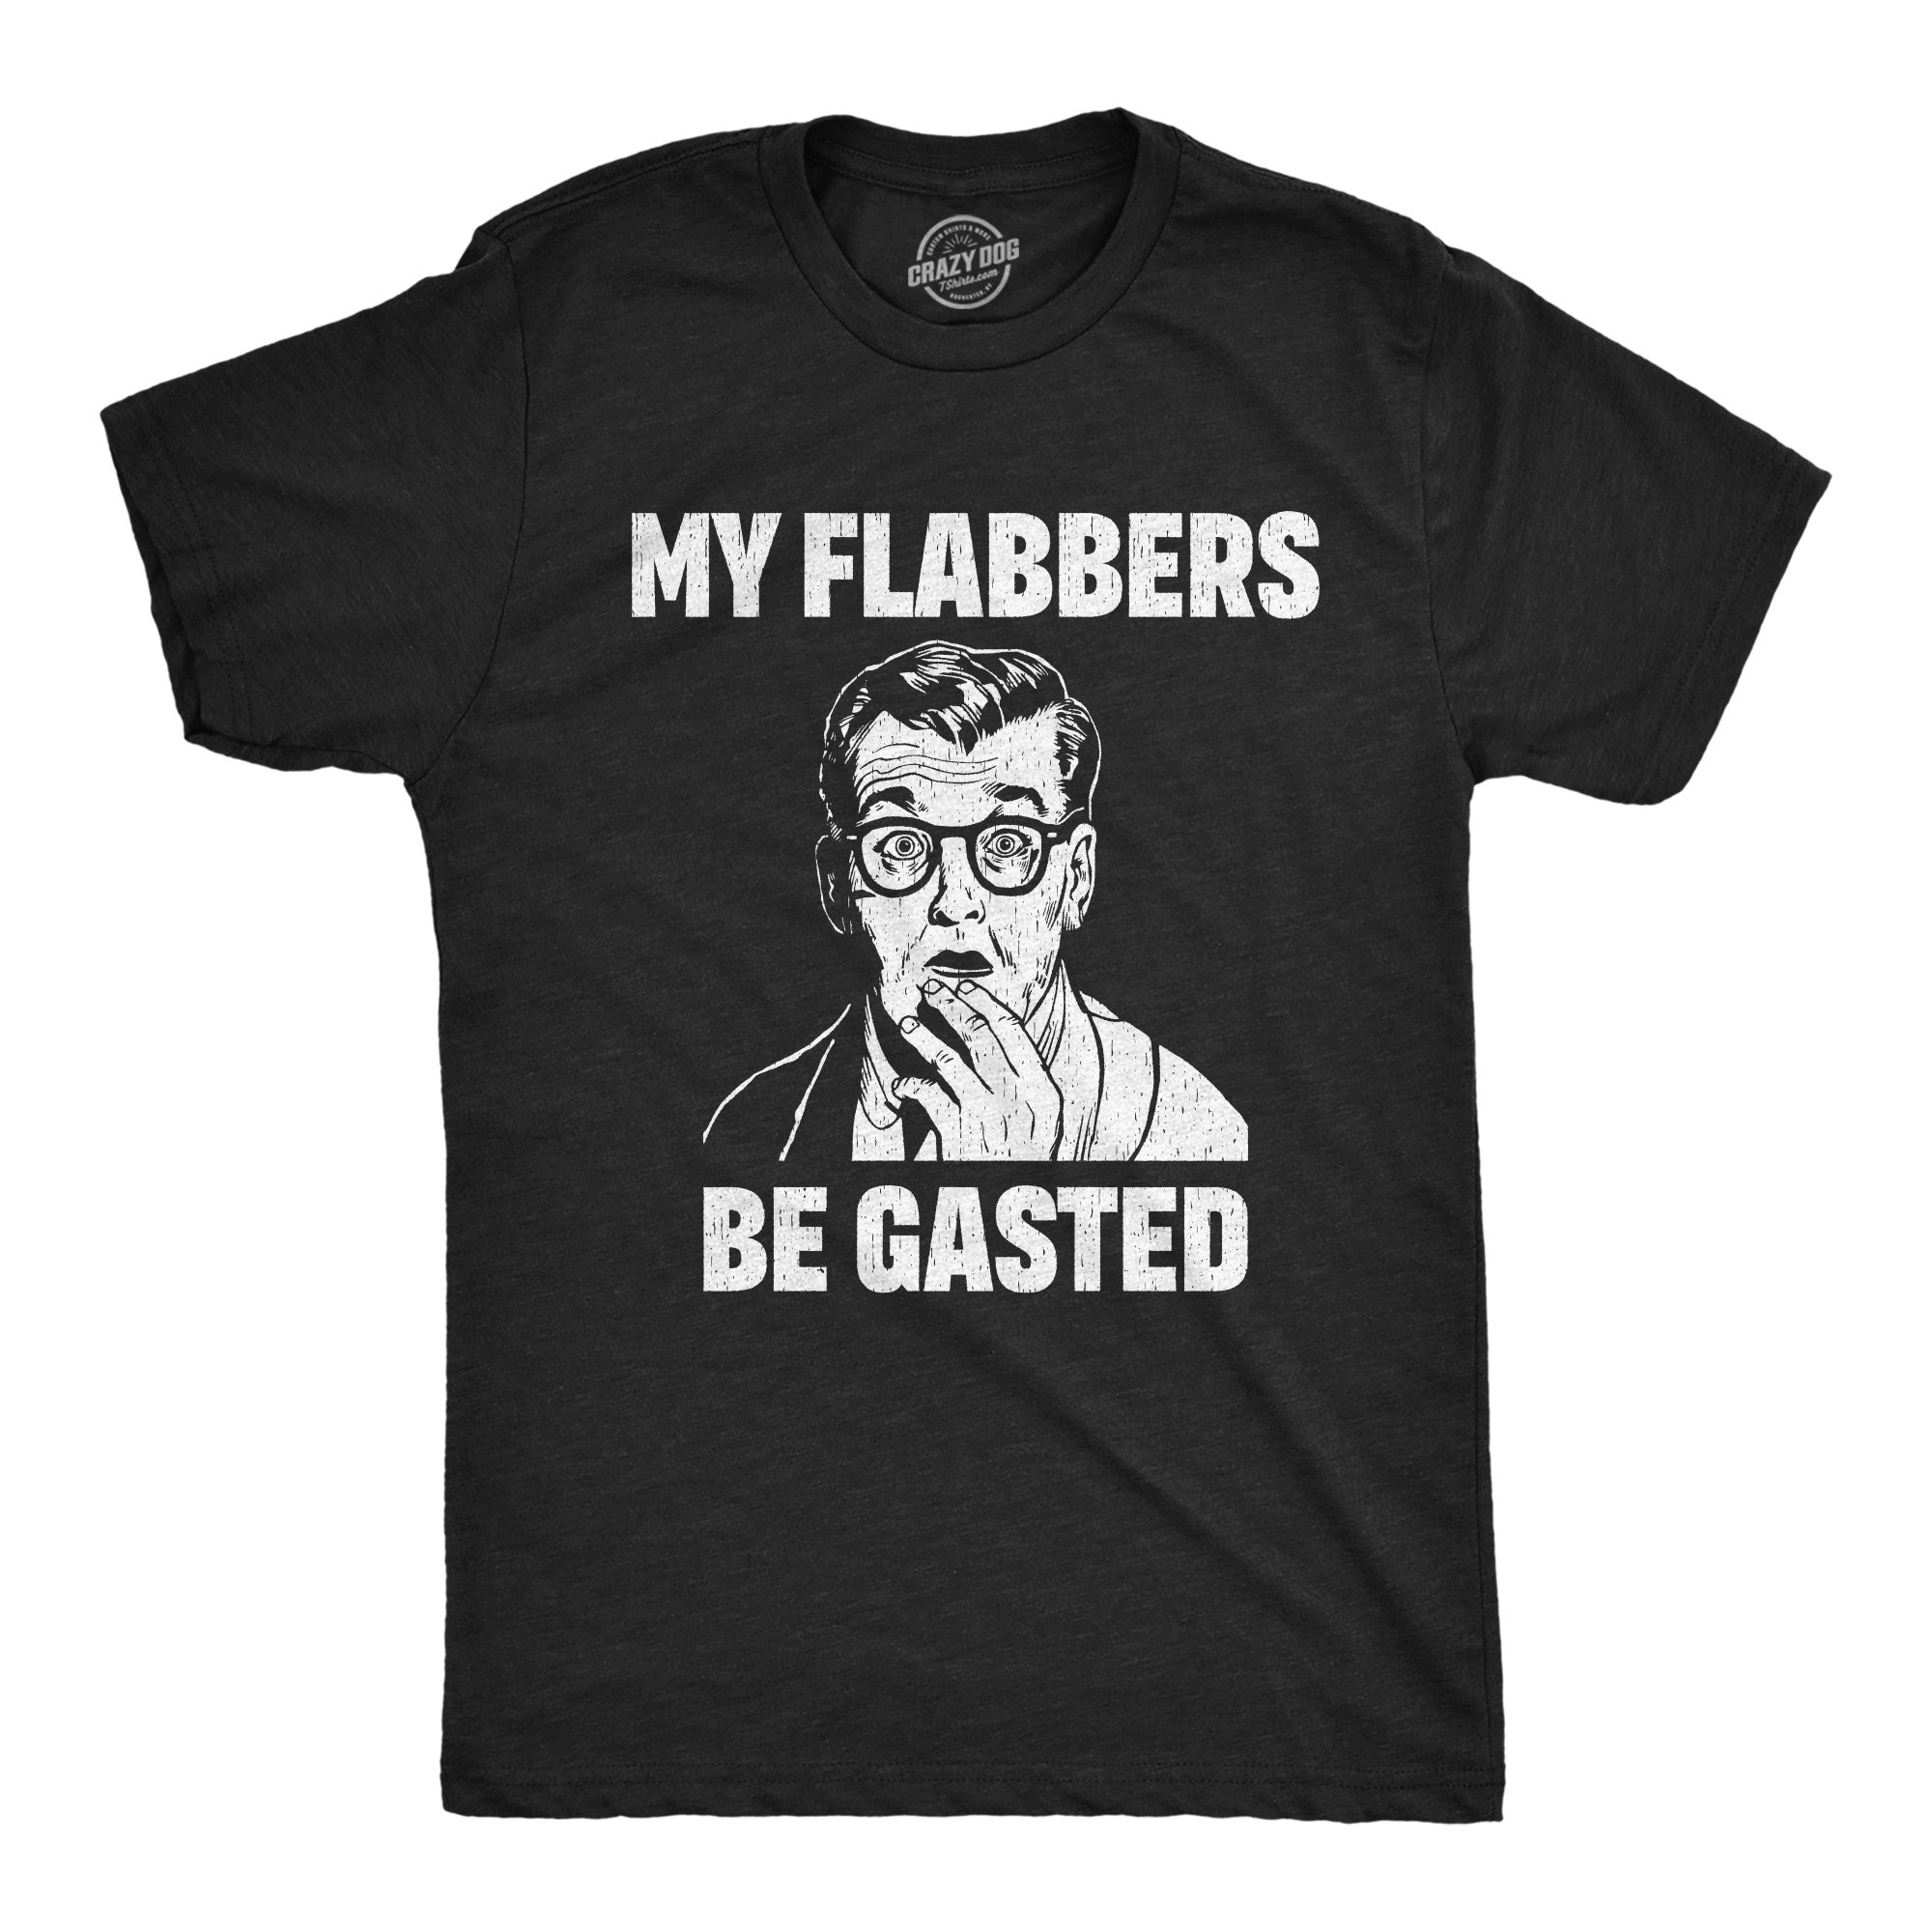 Funny Heather Black - My Flabbers Be Gasted My Flabbers Be Gasted Mens T Shirt Nerdy sarcastic Tee